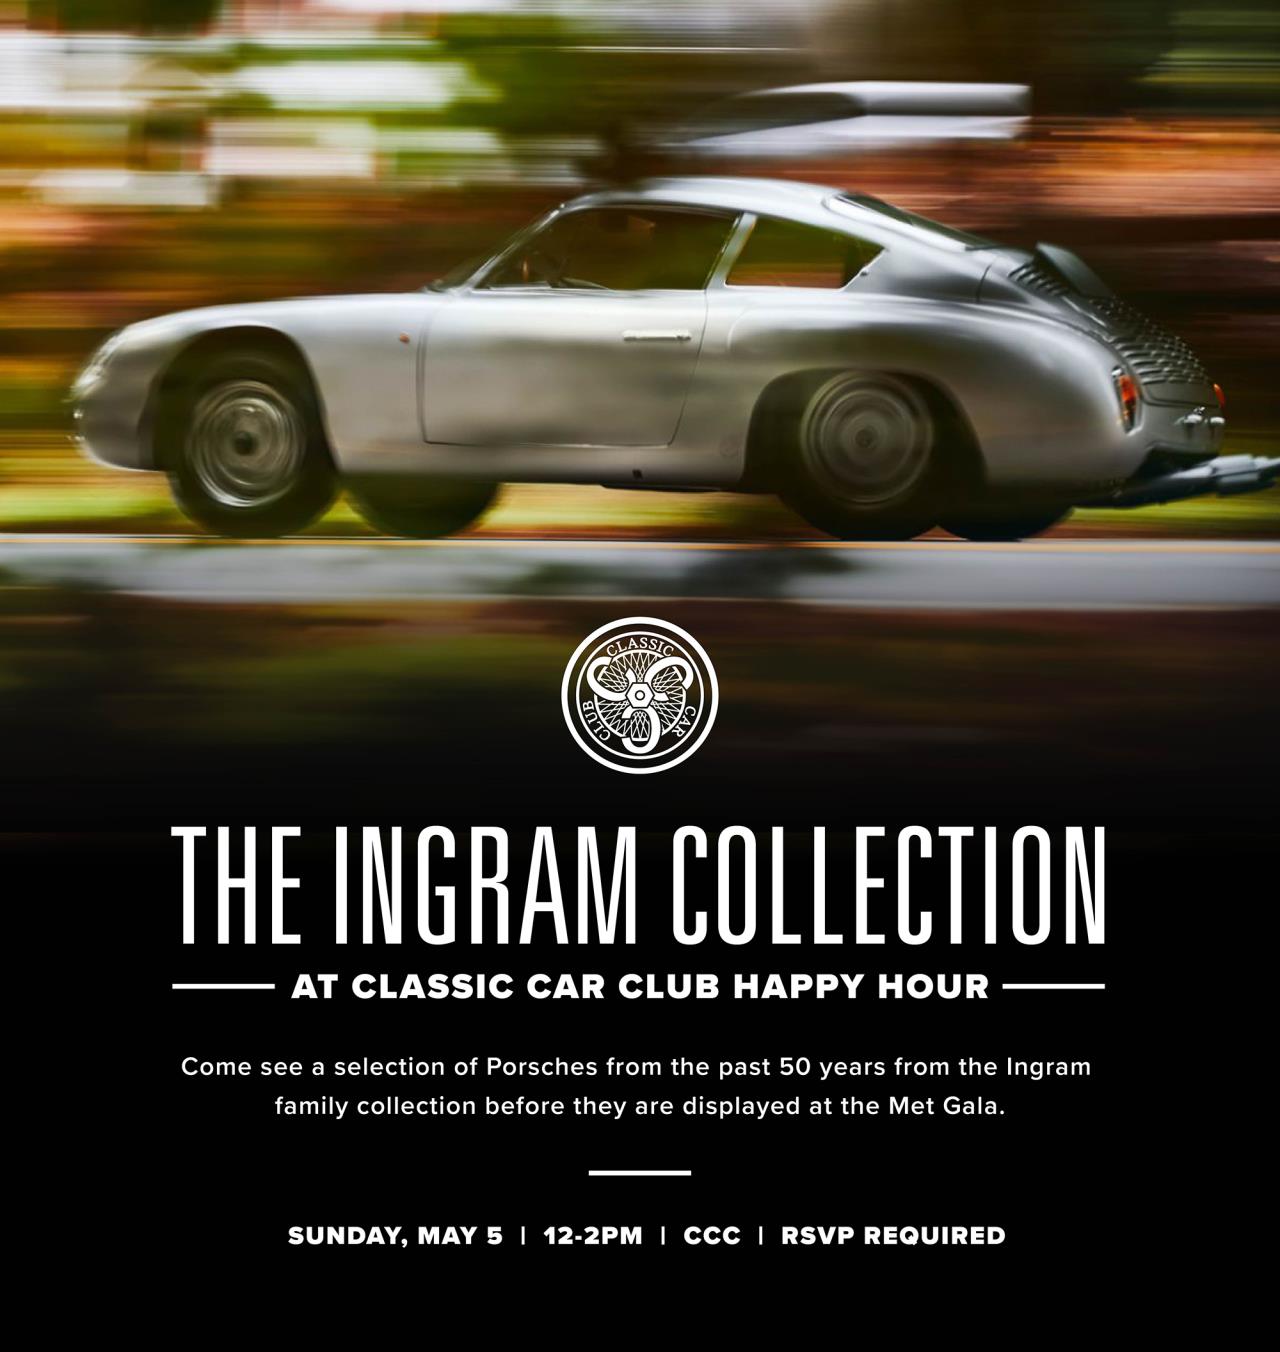 The Ingram Collection at Classic Car Club Happy Hour